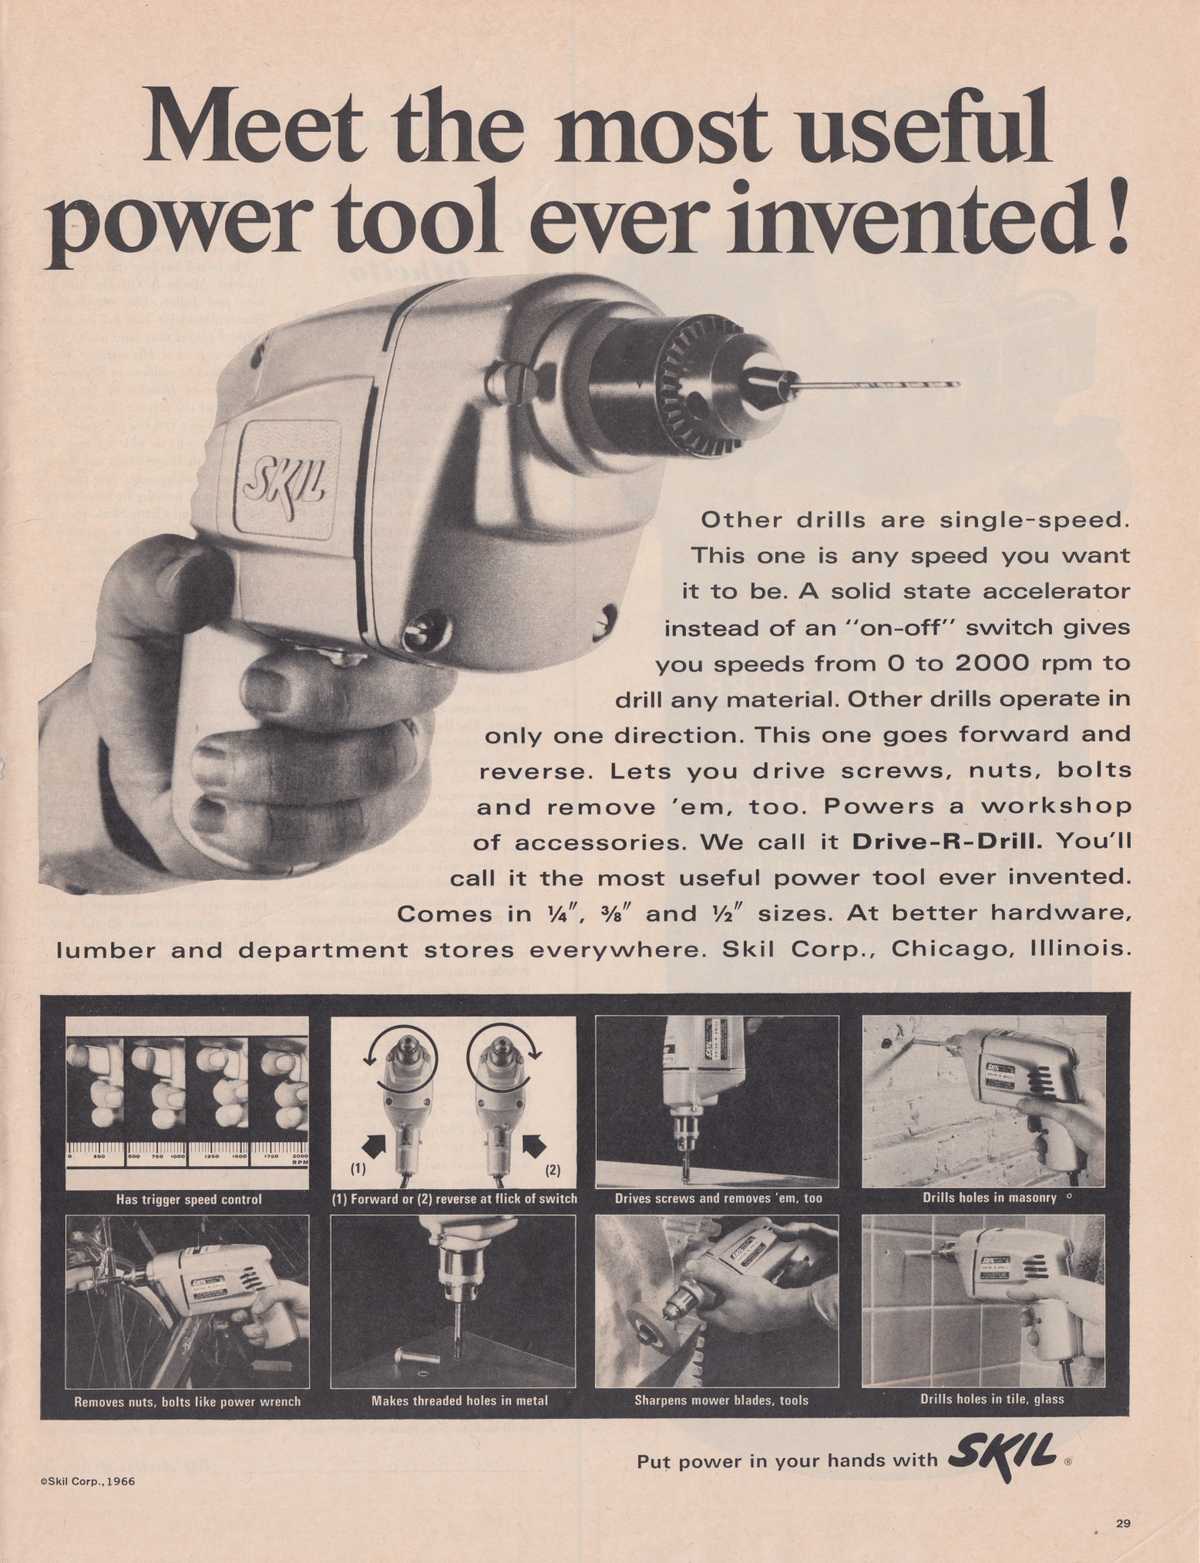 A 1960s printed advertisement for a power drill